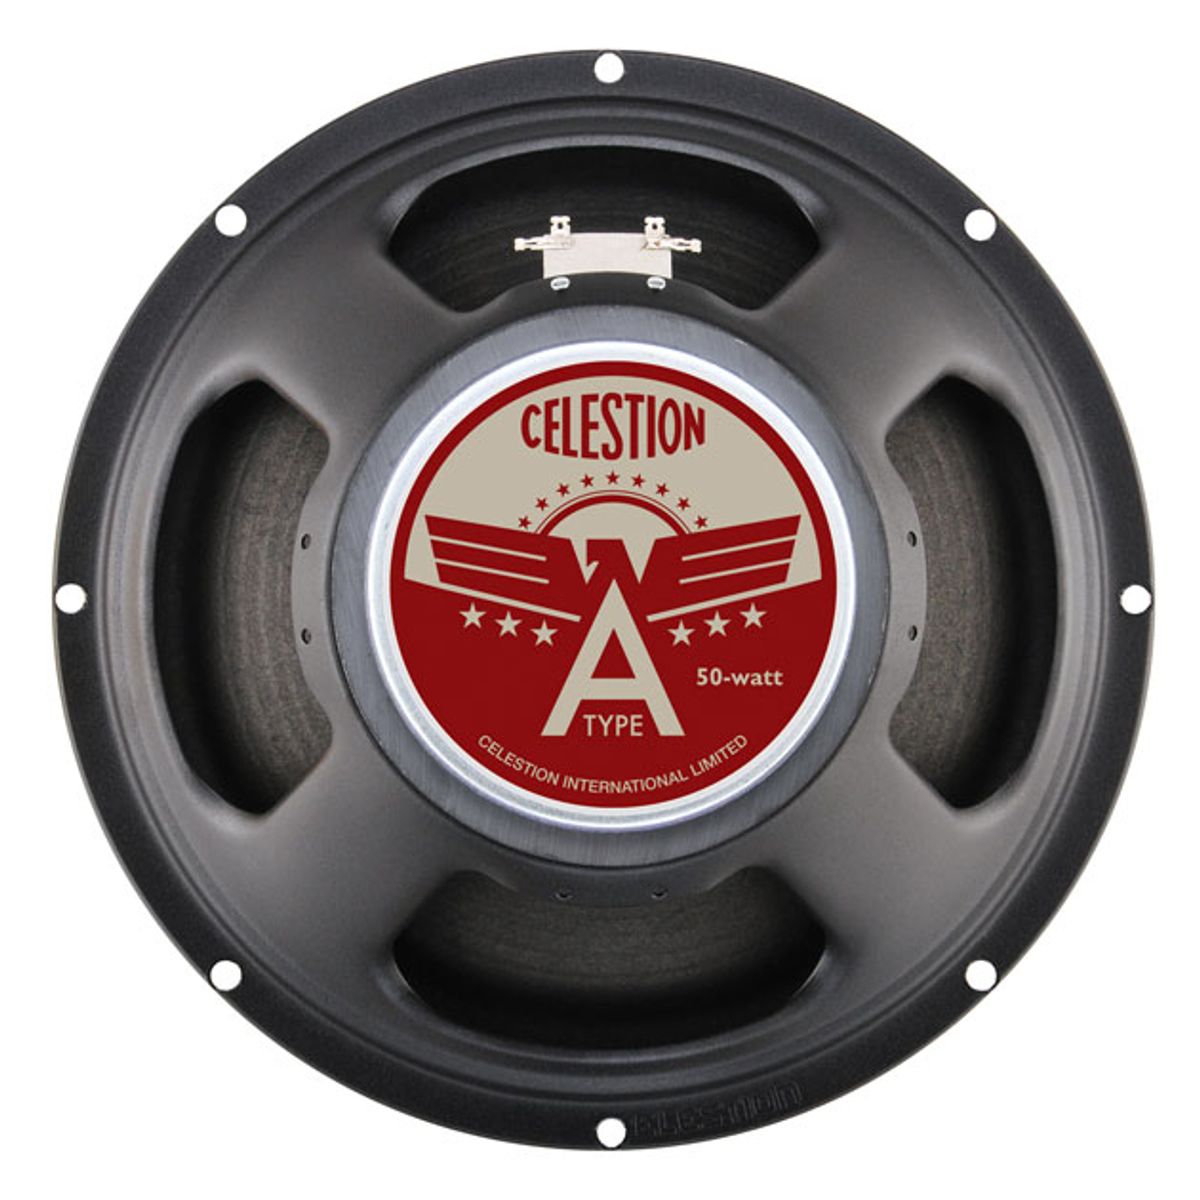 Celestion Introduces A-Type and G12-35XC Speakers